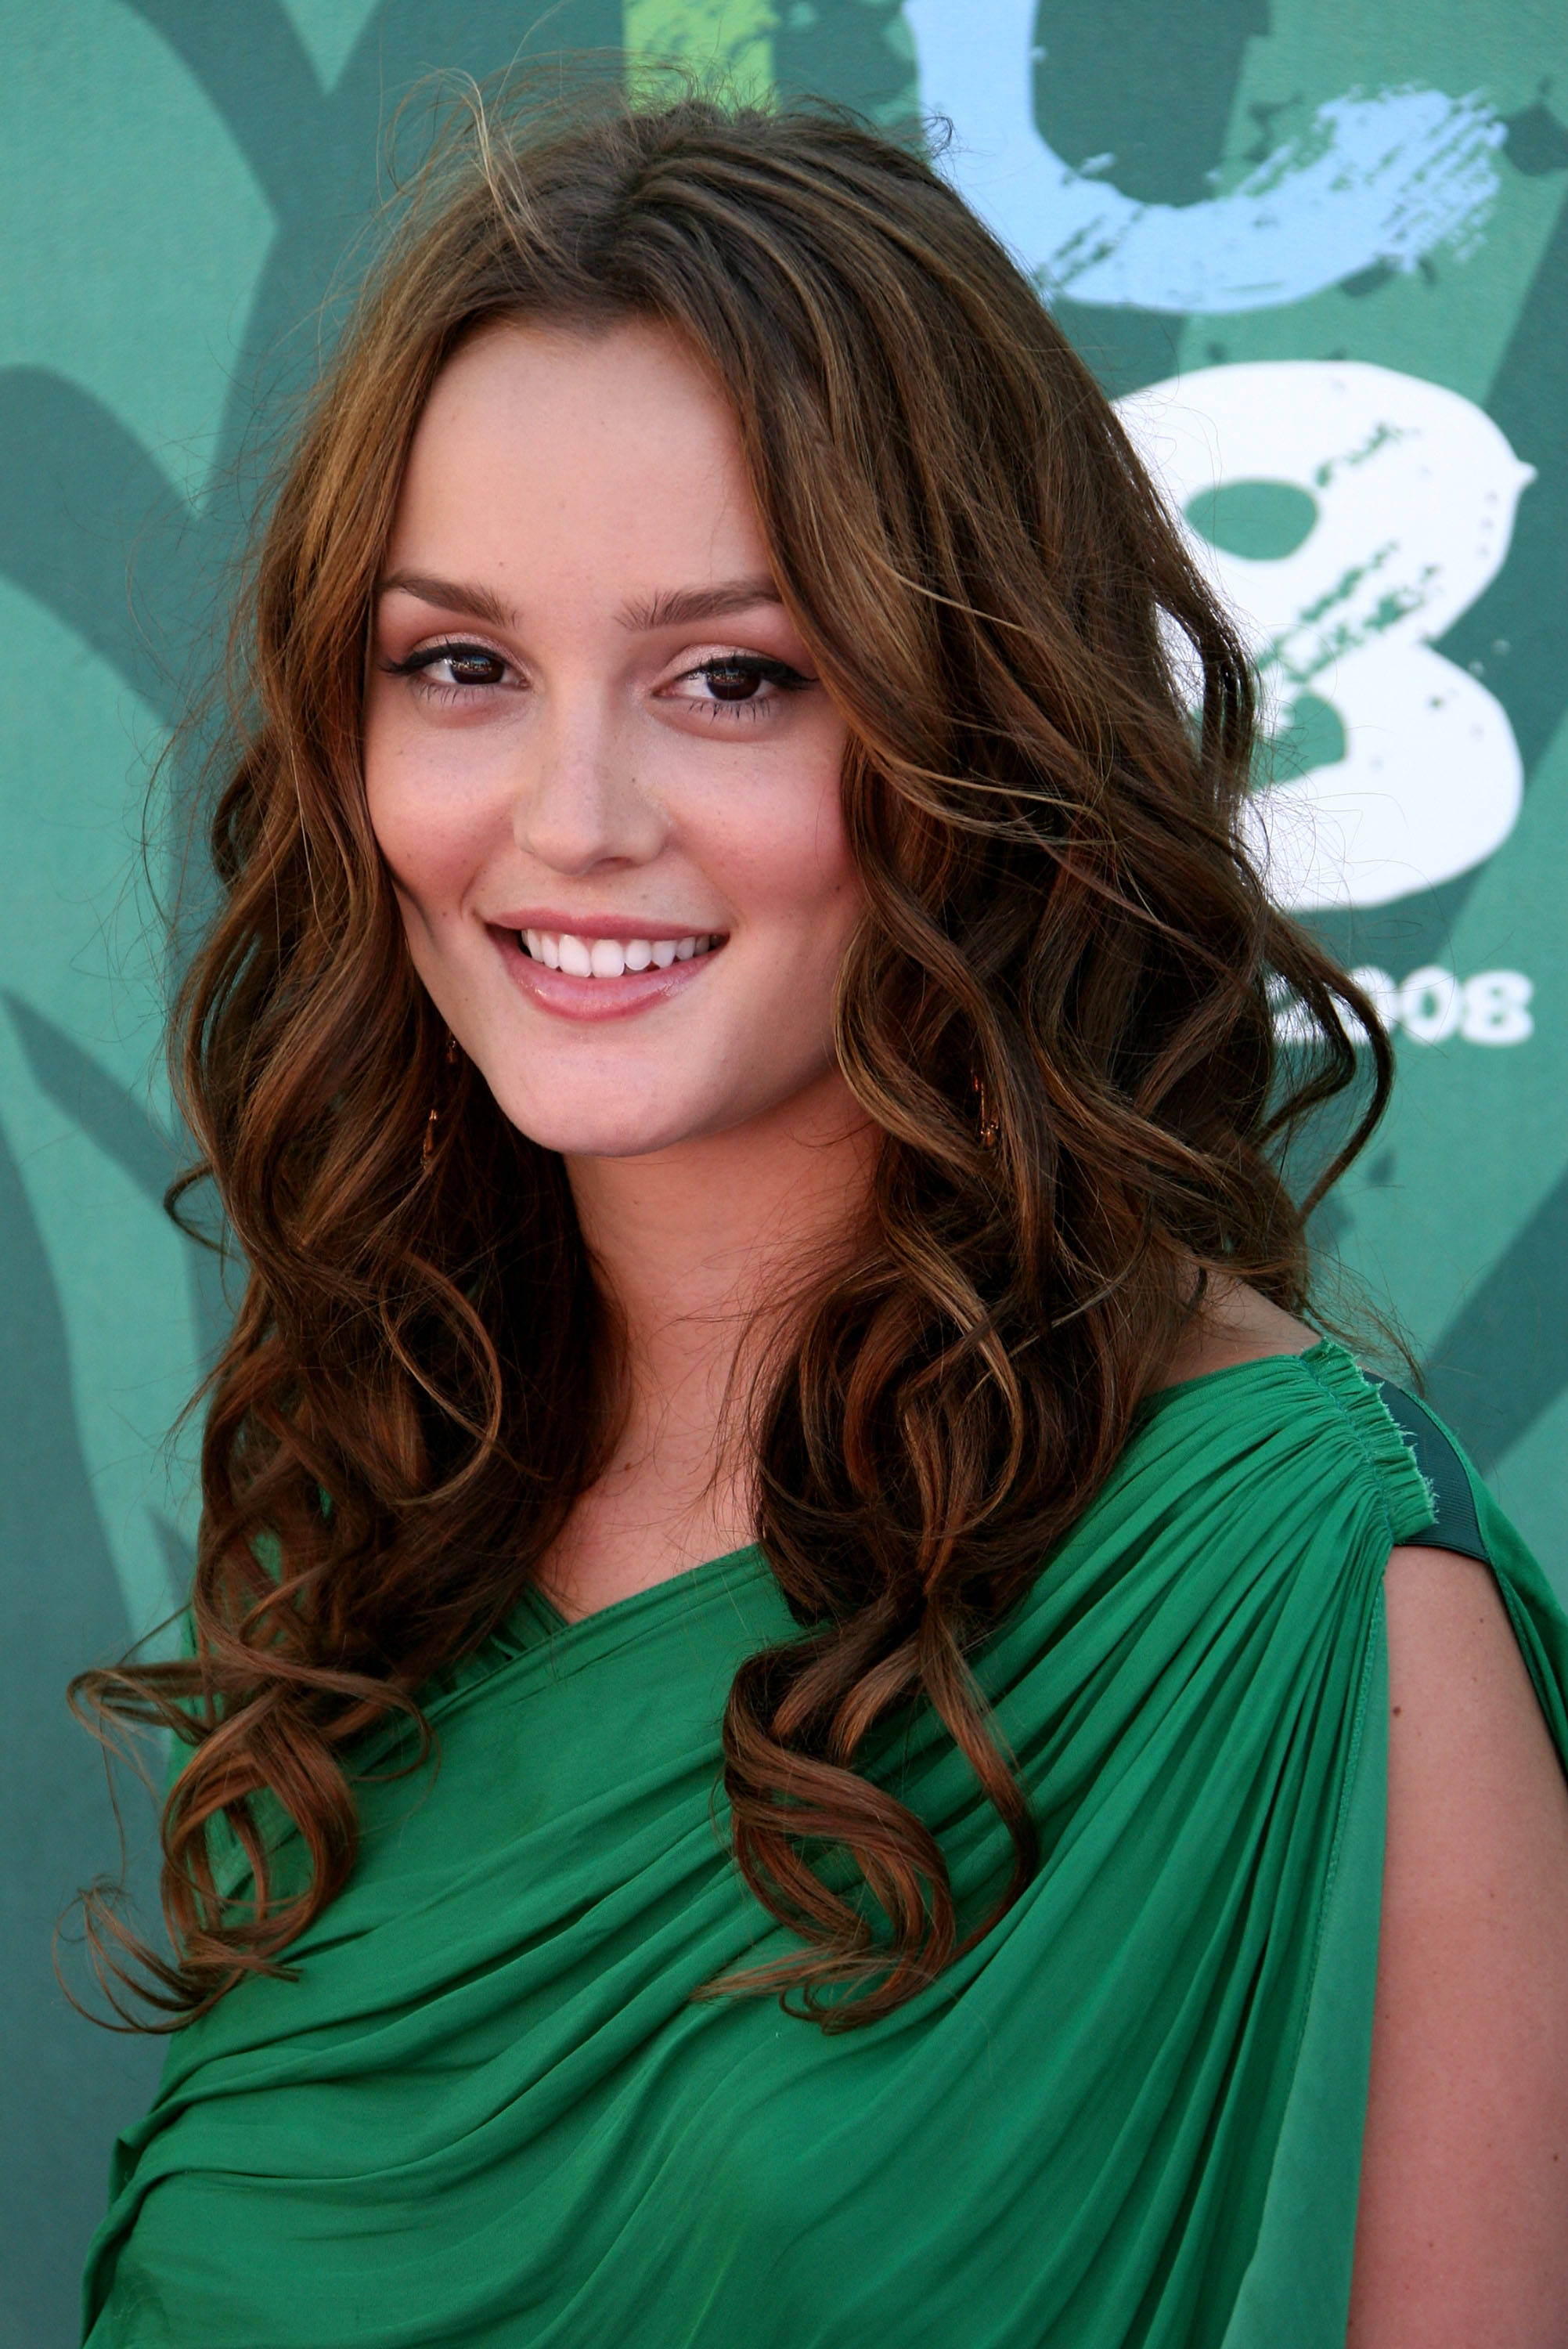 Curled hairstyles curled-hairstyles-08-15